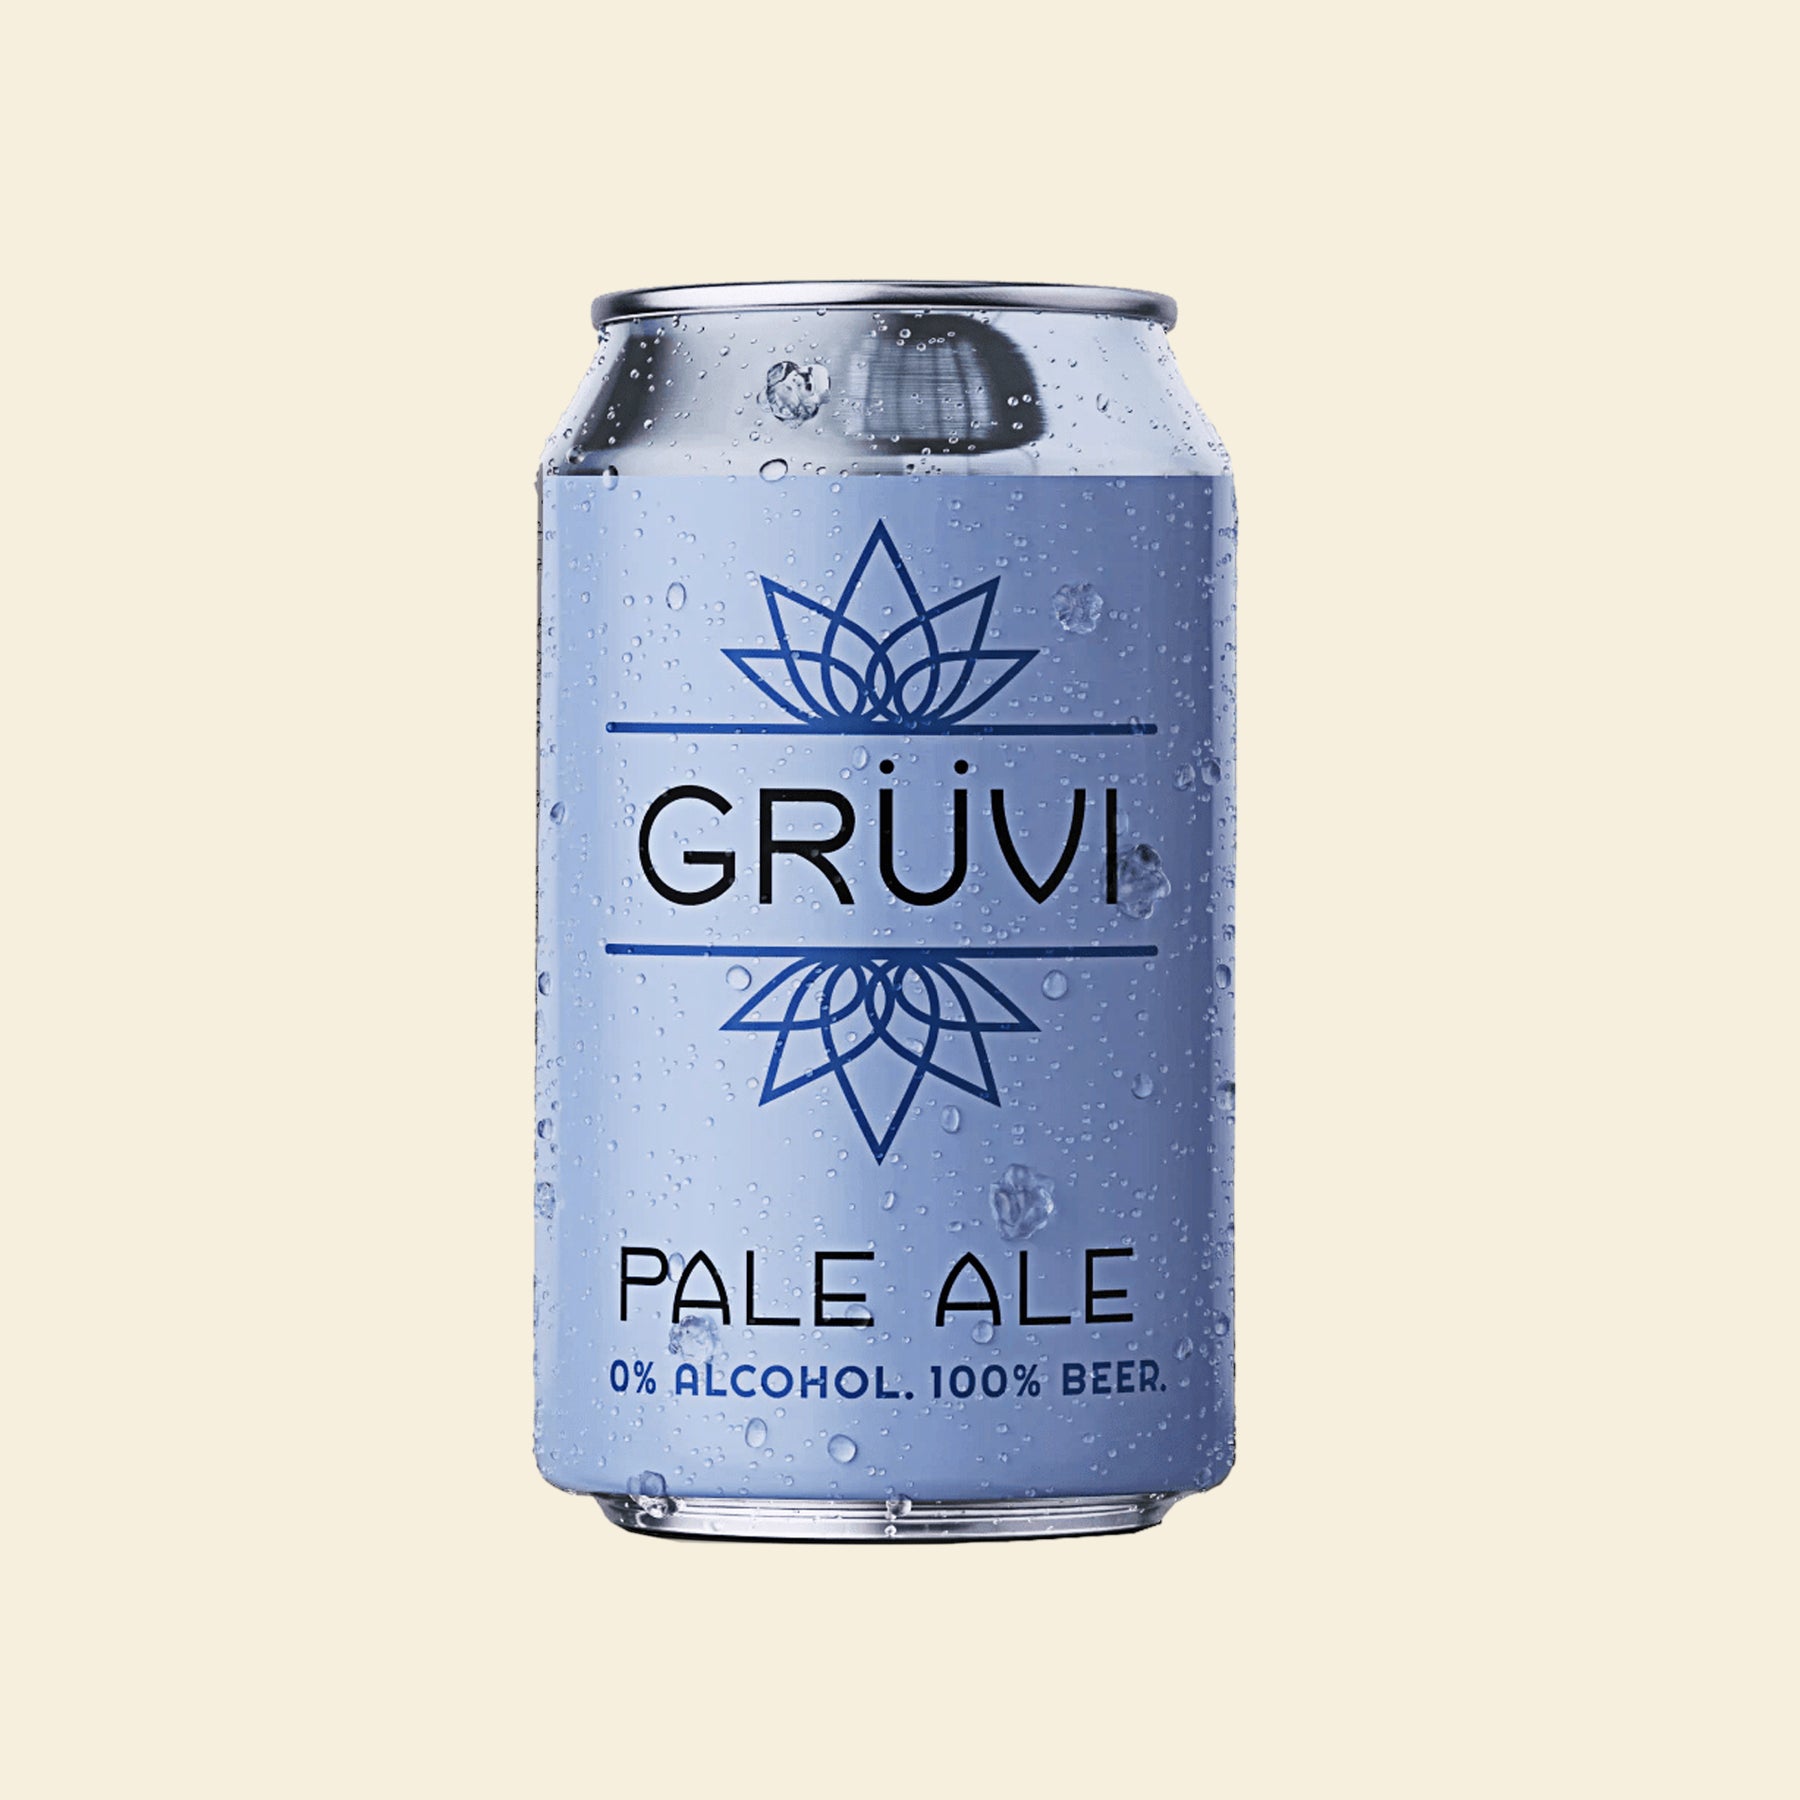 Gruvi Pale Ale Nonalcoholic Beer